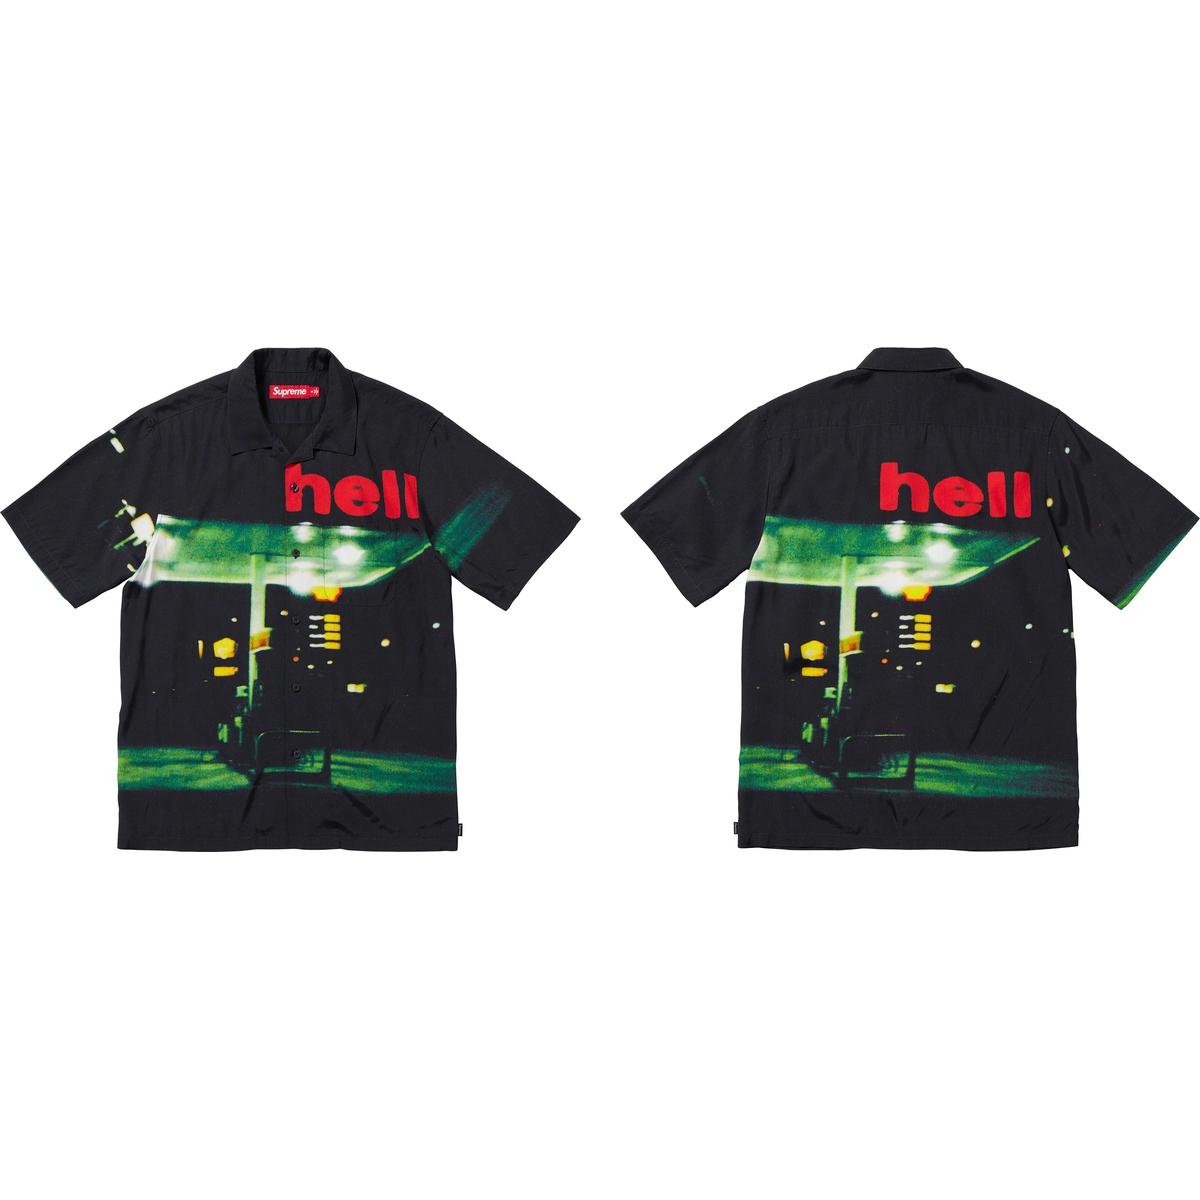 Supreme Hell S S Shirt released during fall winter 23 season